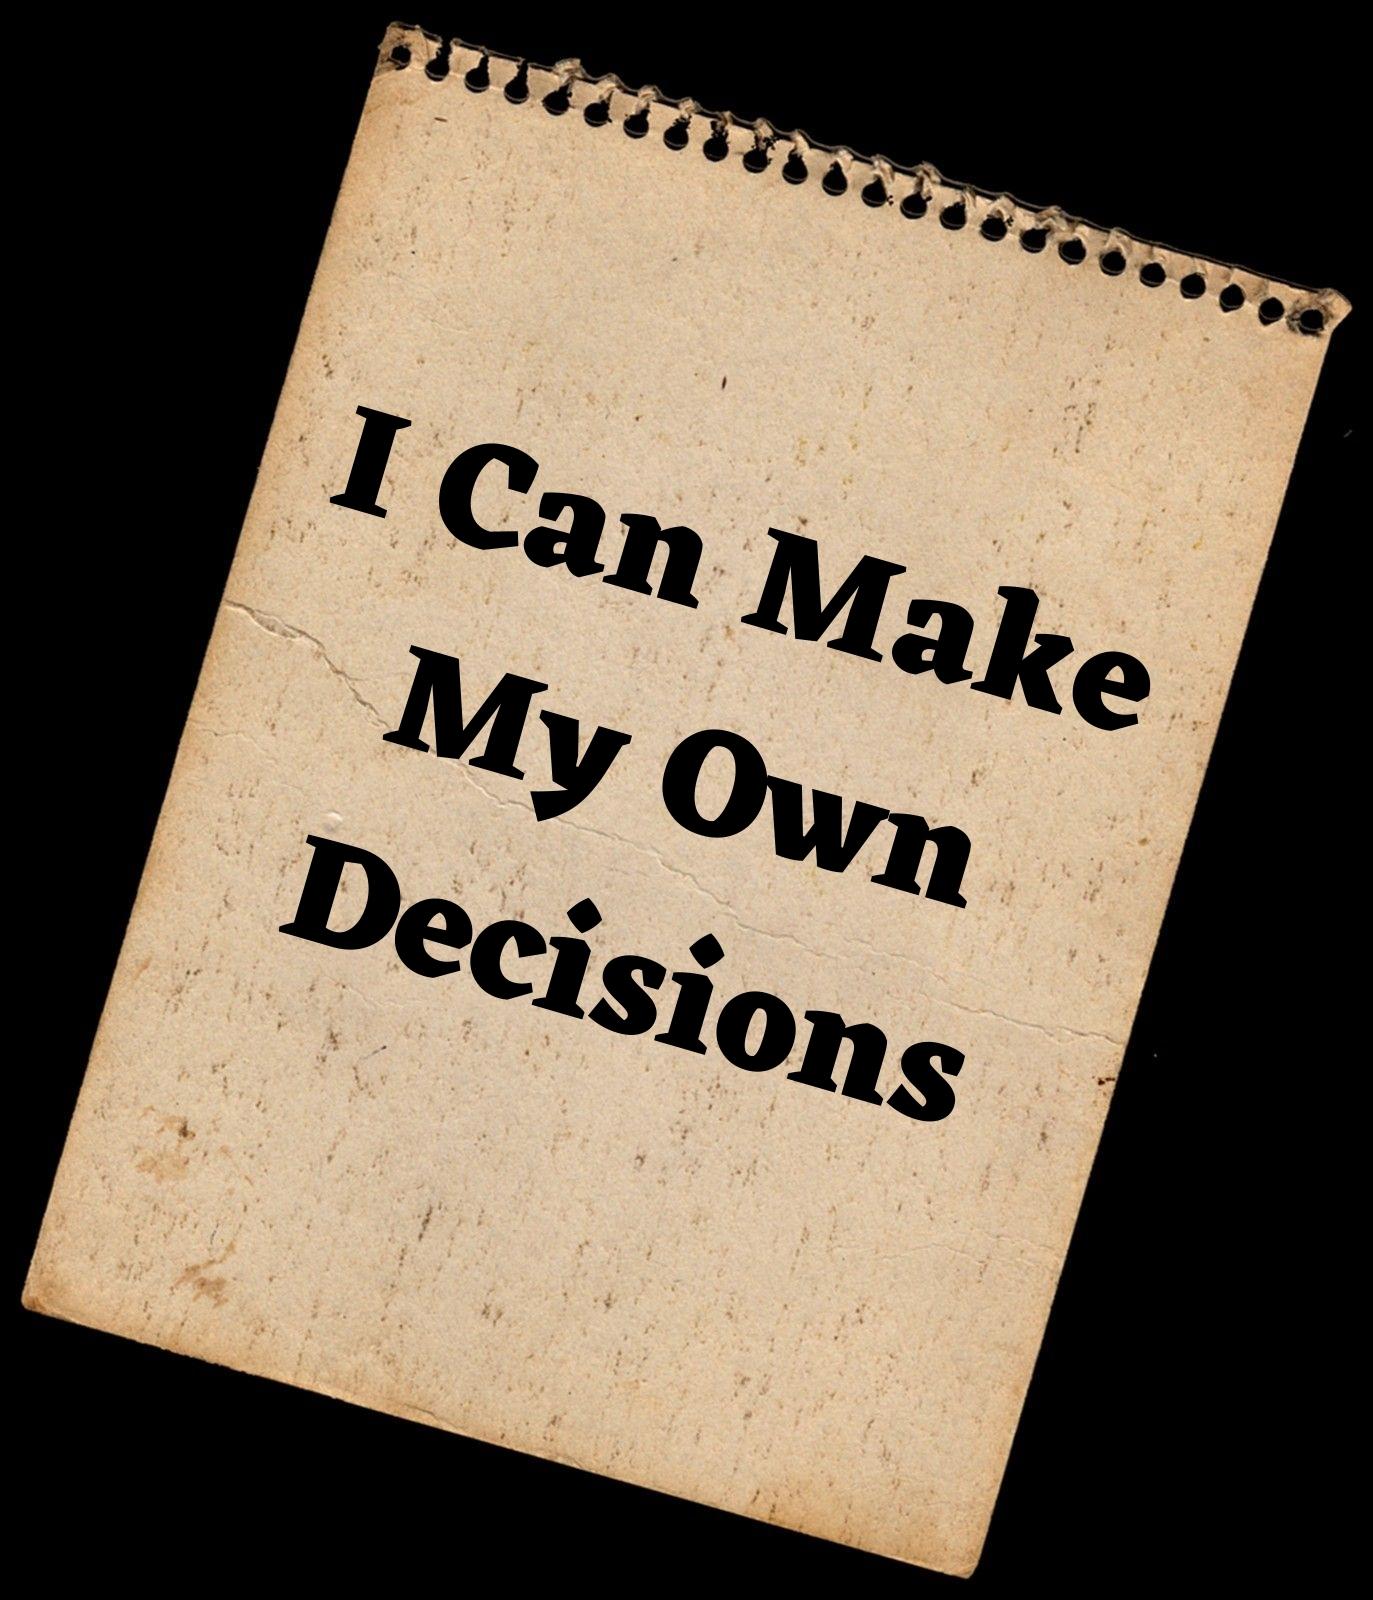  I can make my own decisions.